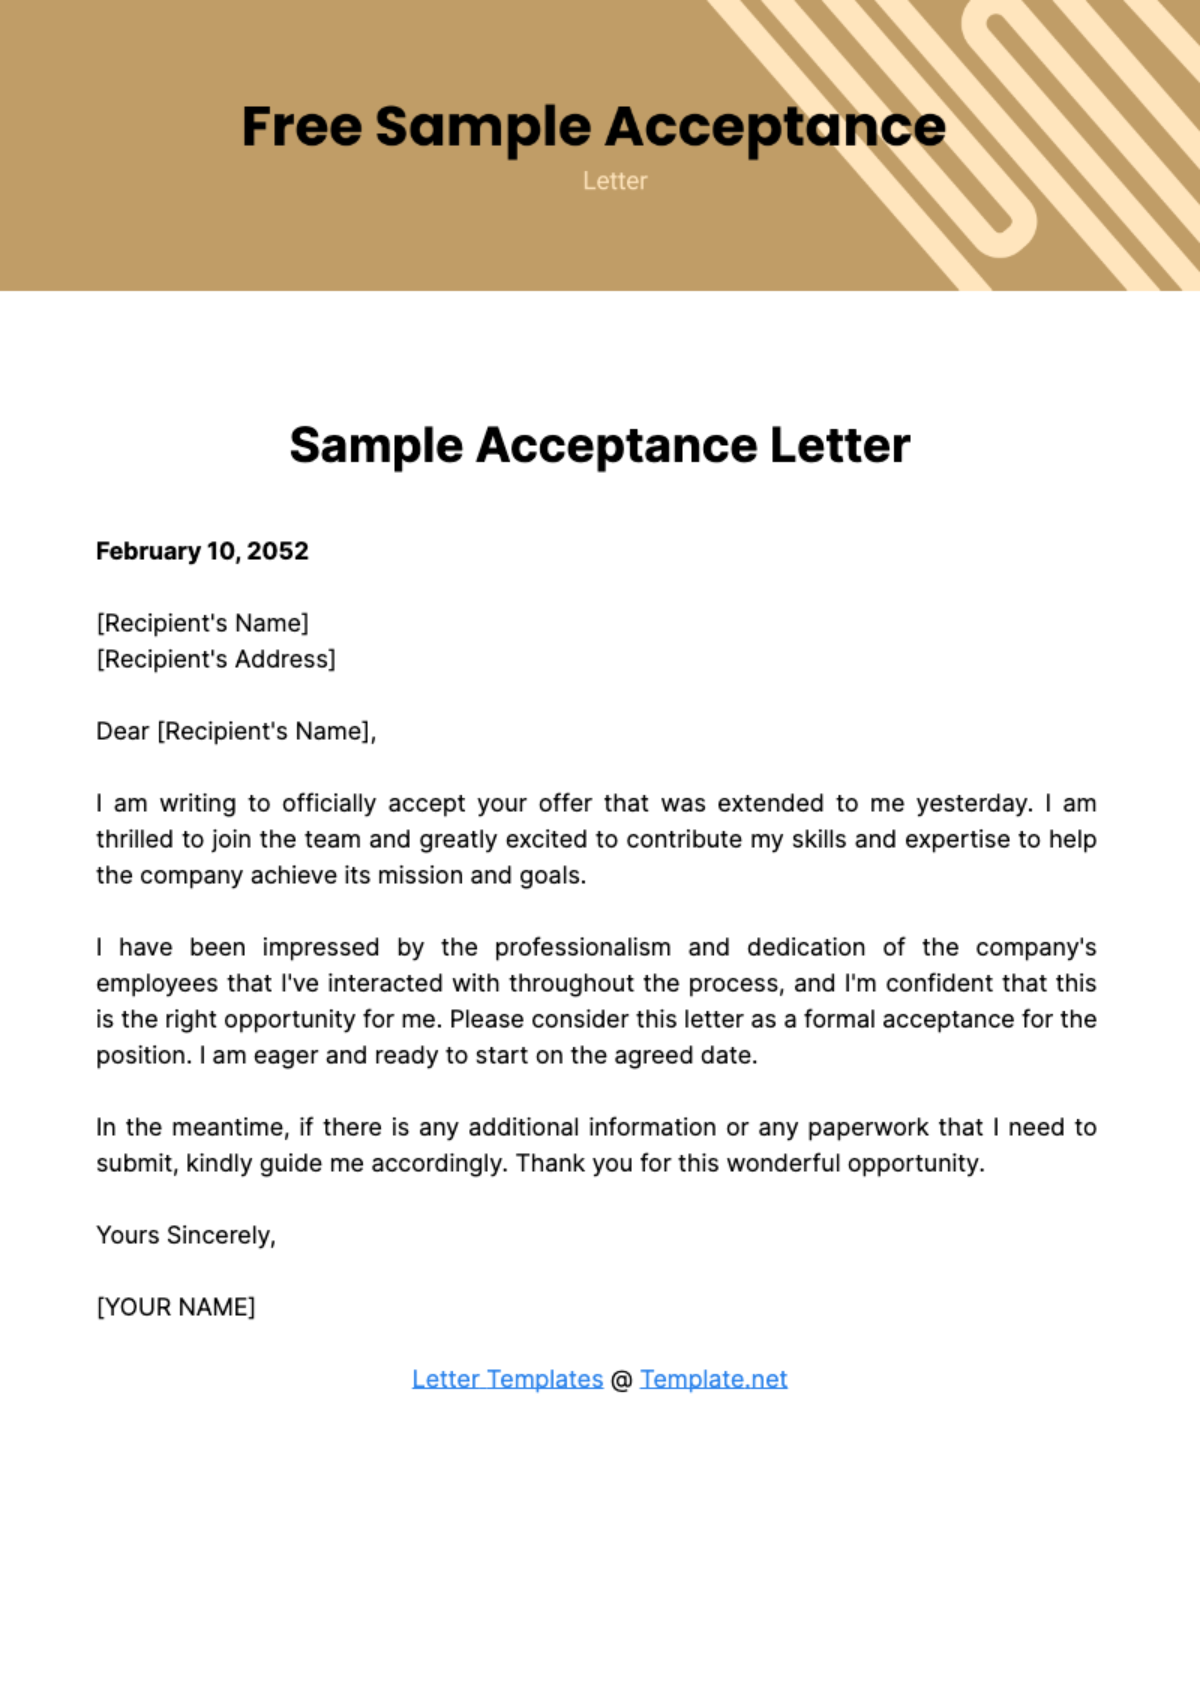 Free Sample Acceptance Letter Template